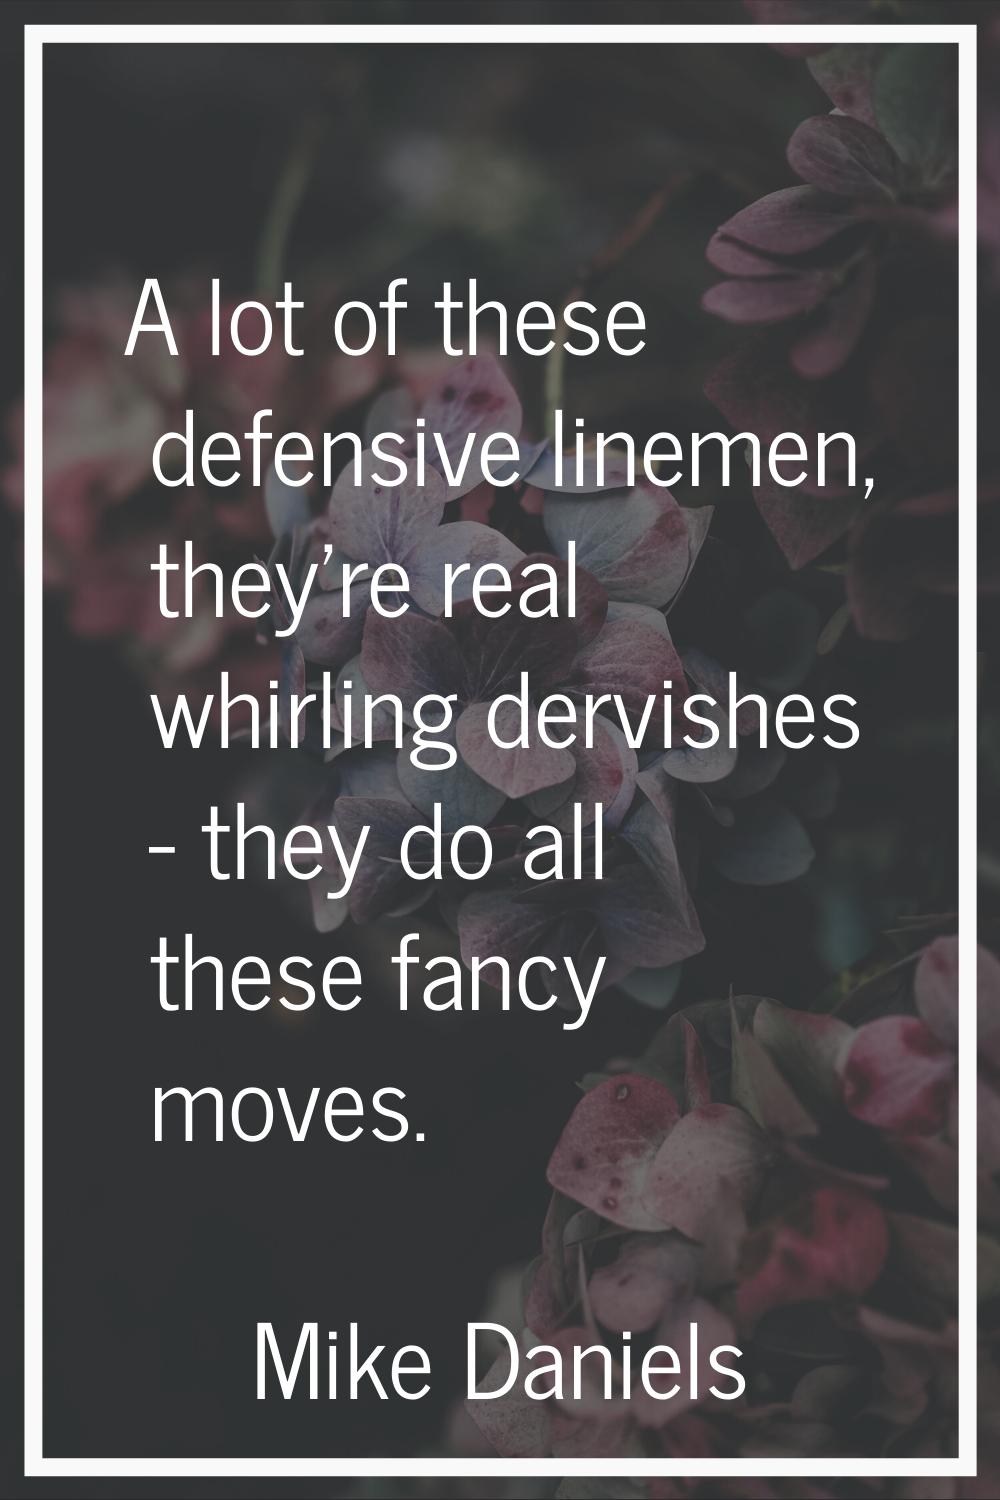 A lot of these defensive linemen, they're real whirling dervishes - they do all these fancy moves.